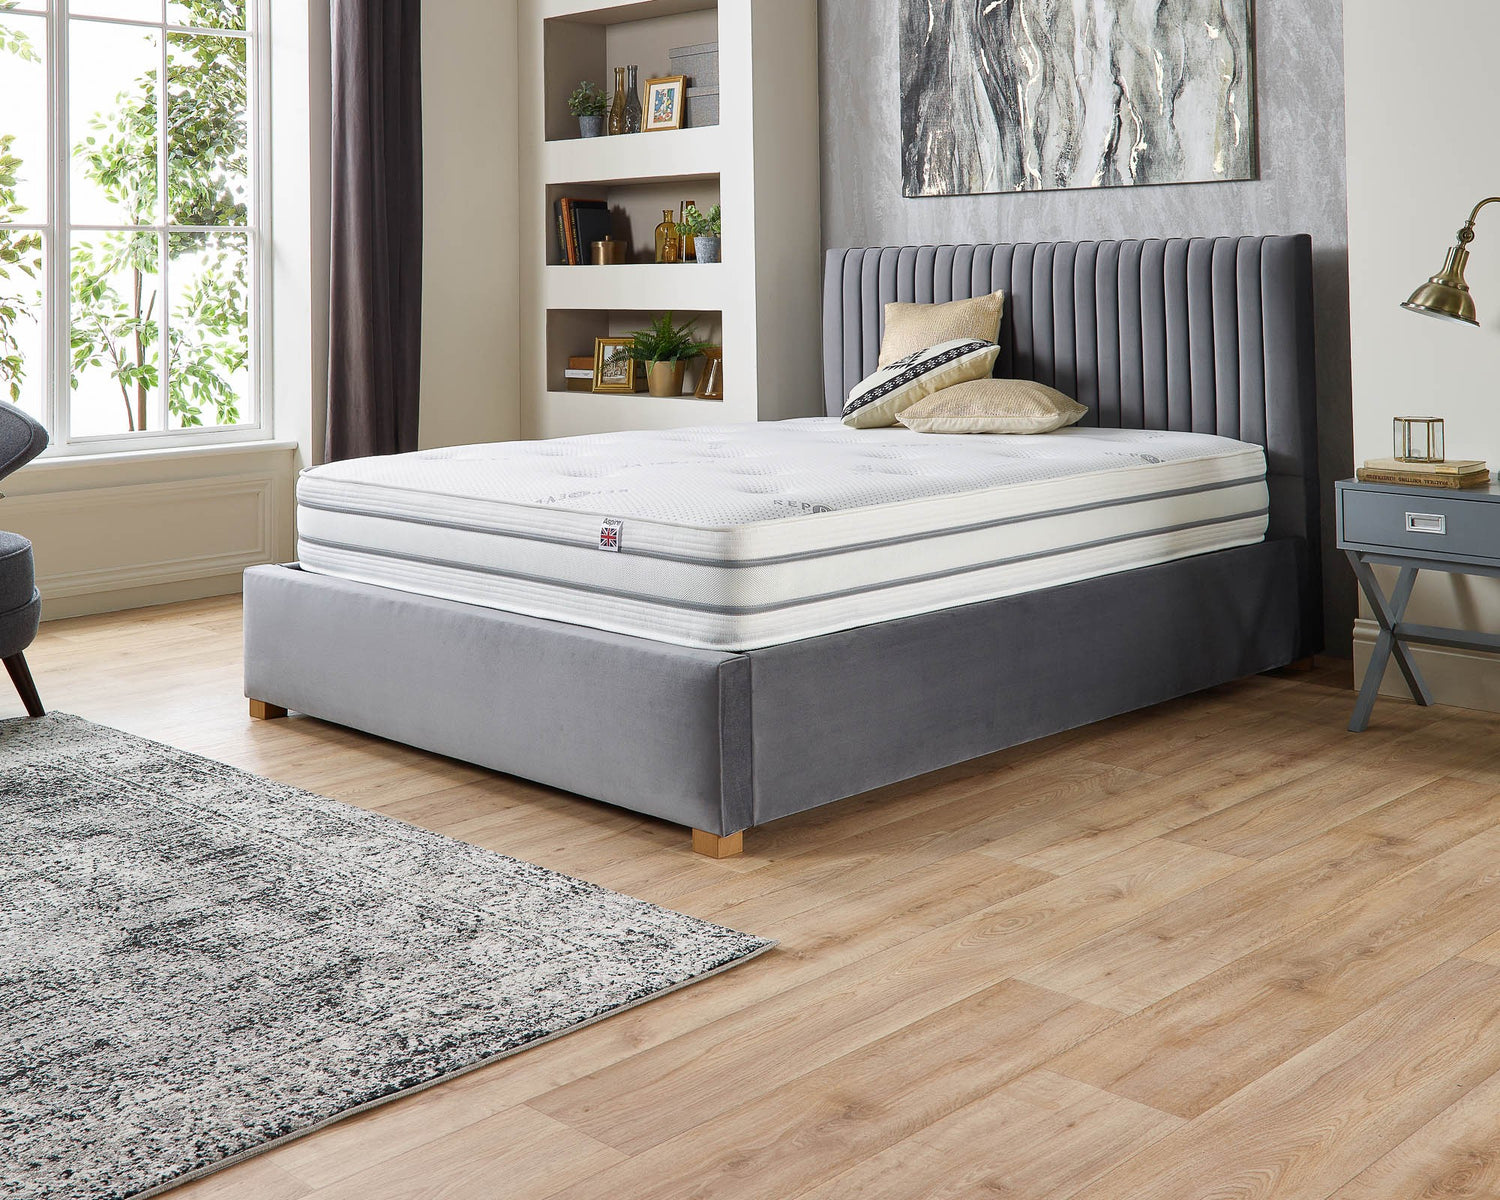 Aspire Eco Reprieve Dual Sided 1000 Pocket+ Mattress From Side-Better Bed Company